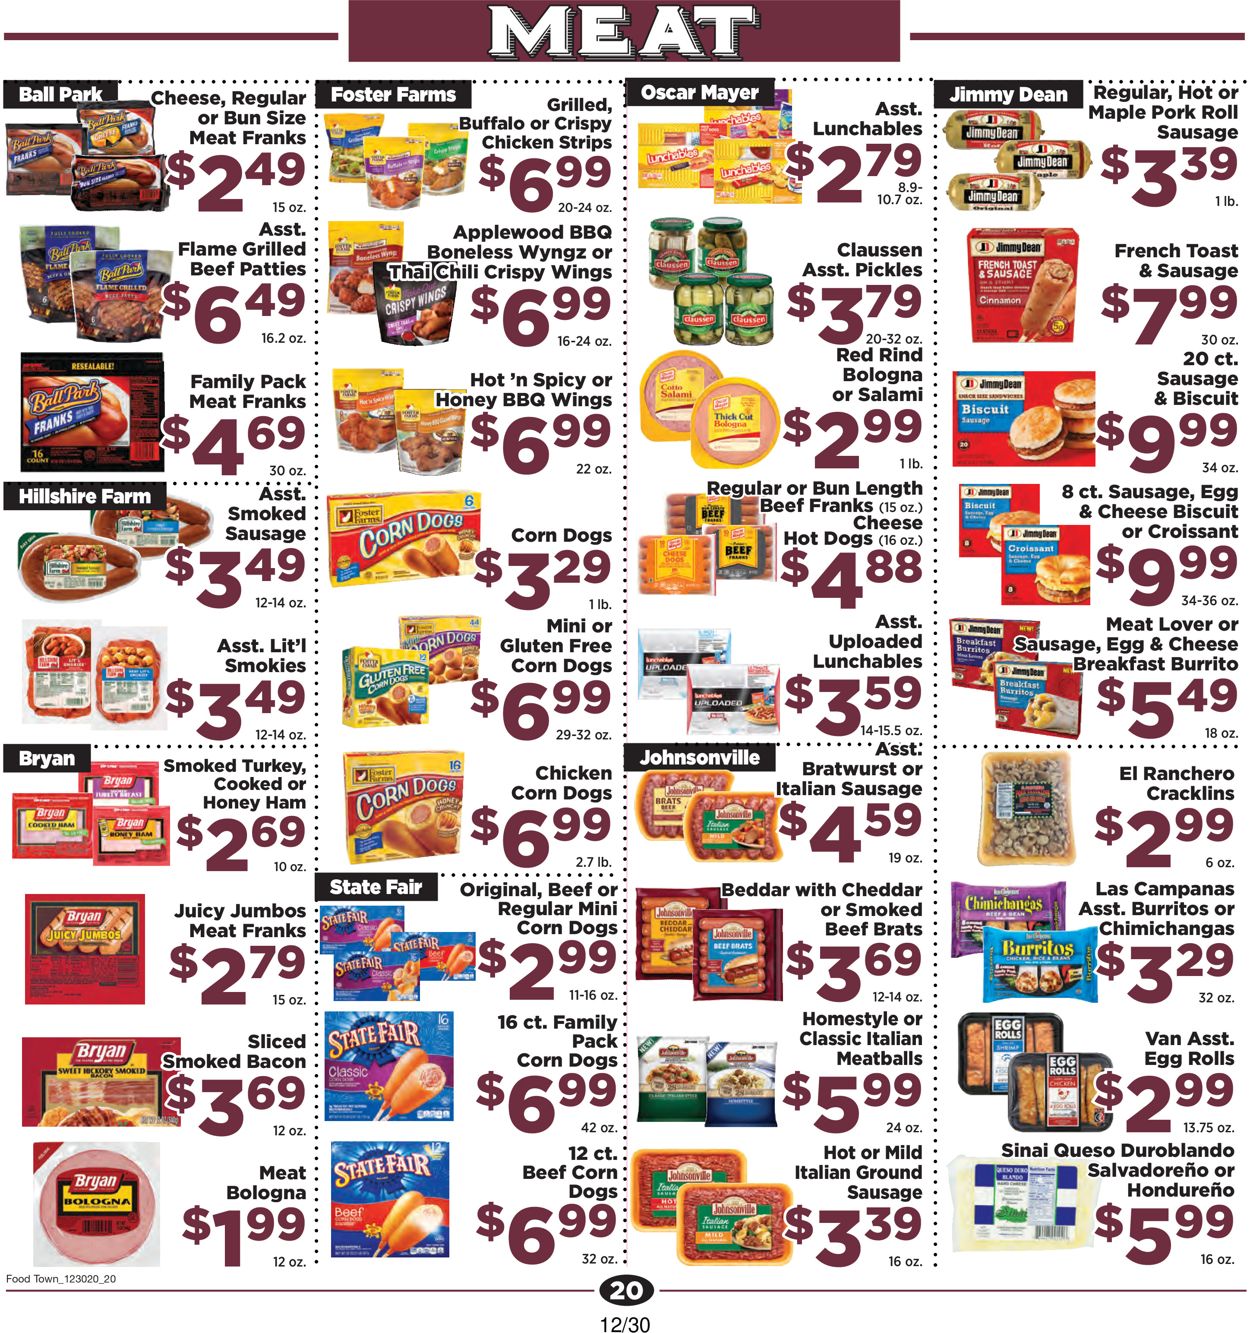 Food Town Specials & Grocery Ad Weekly Ad Circular - valid 12/30-01/05/2021 (Page 20)